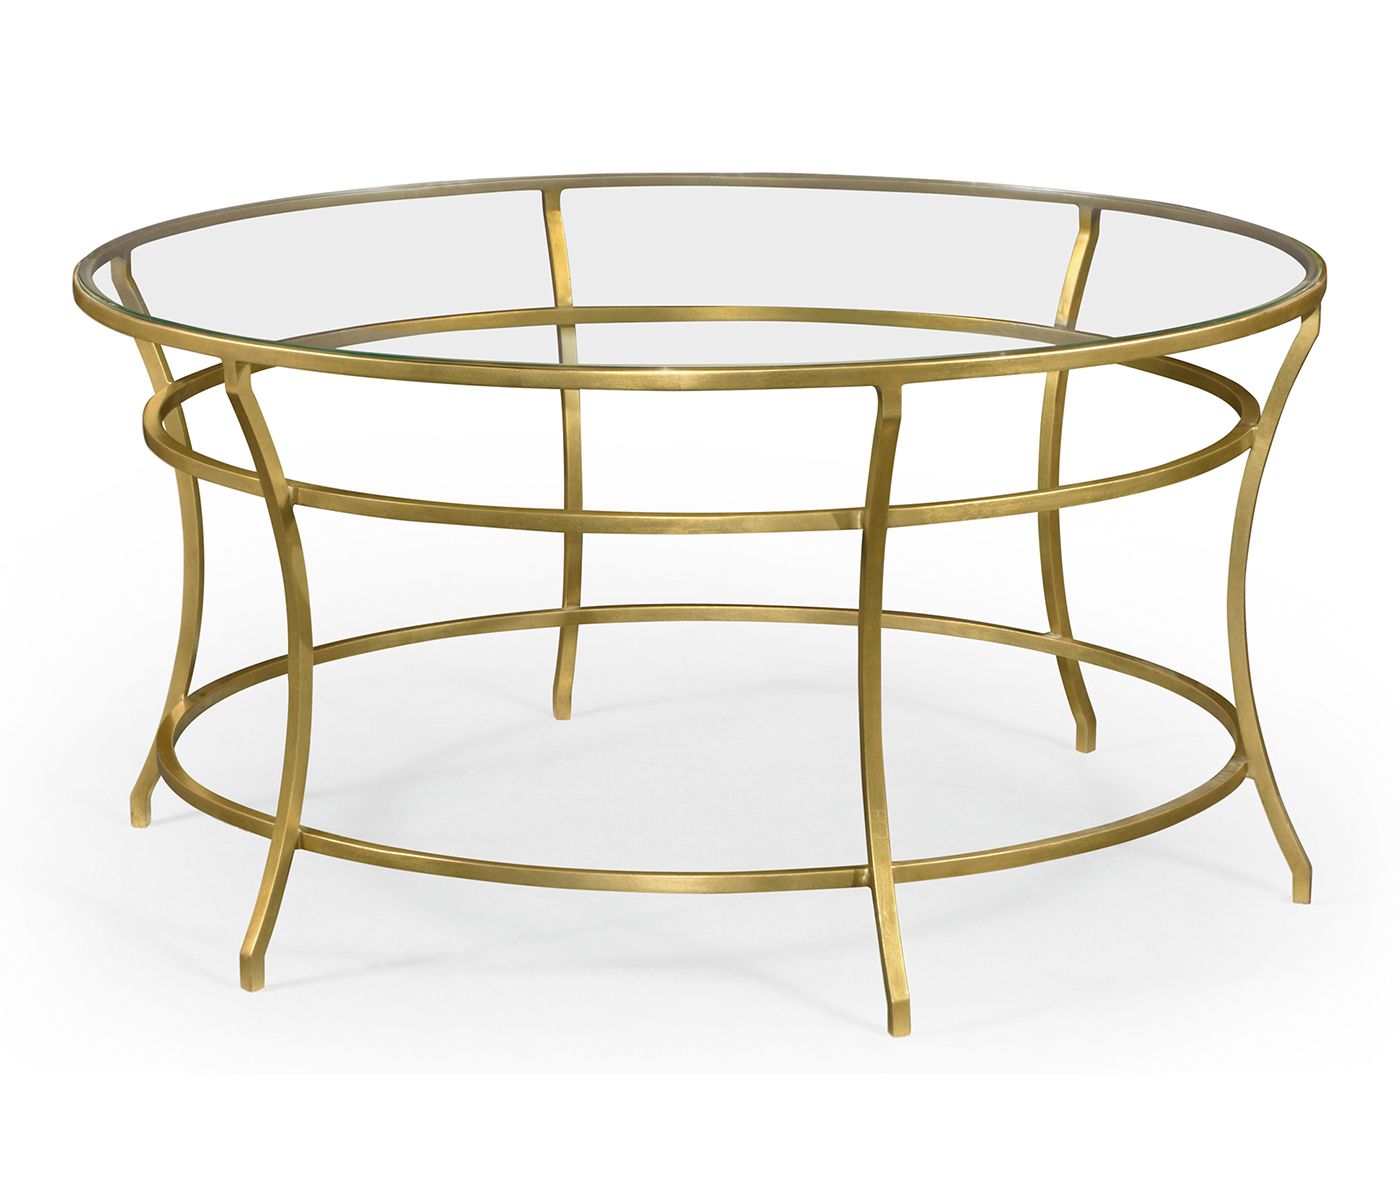 Gilded Iron Round Coffee Table With A Clear Glass Top Inside Famous Round Iron Coffee Tables (View 6 of 20)